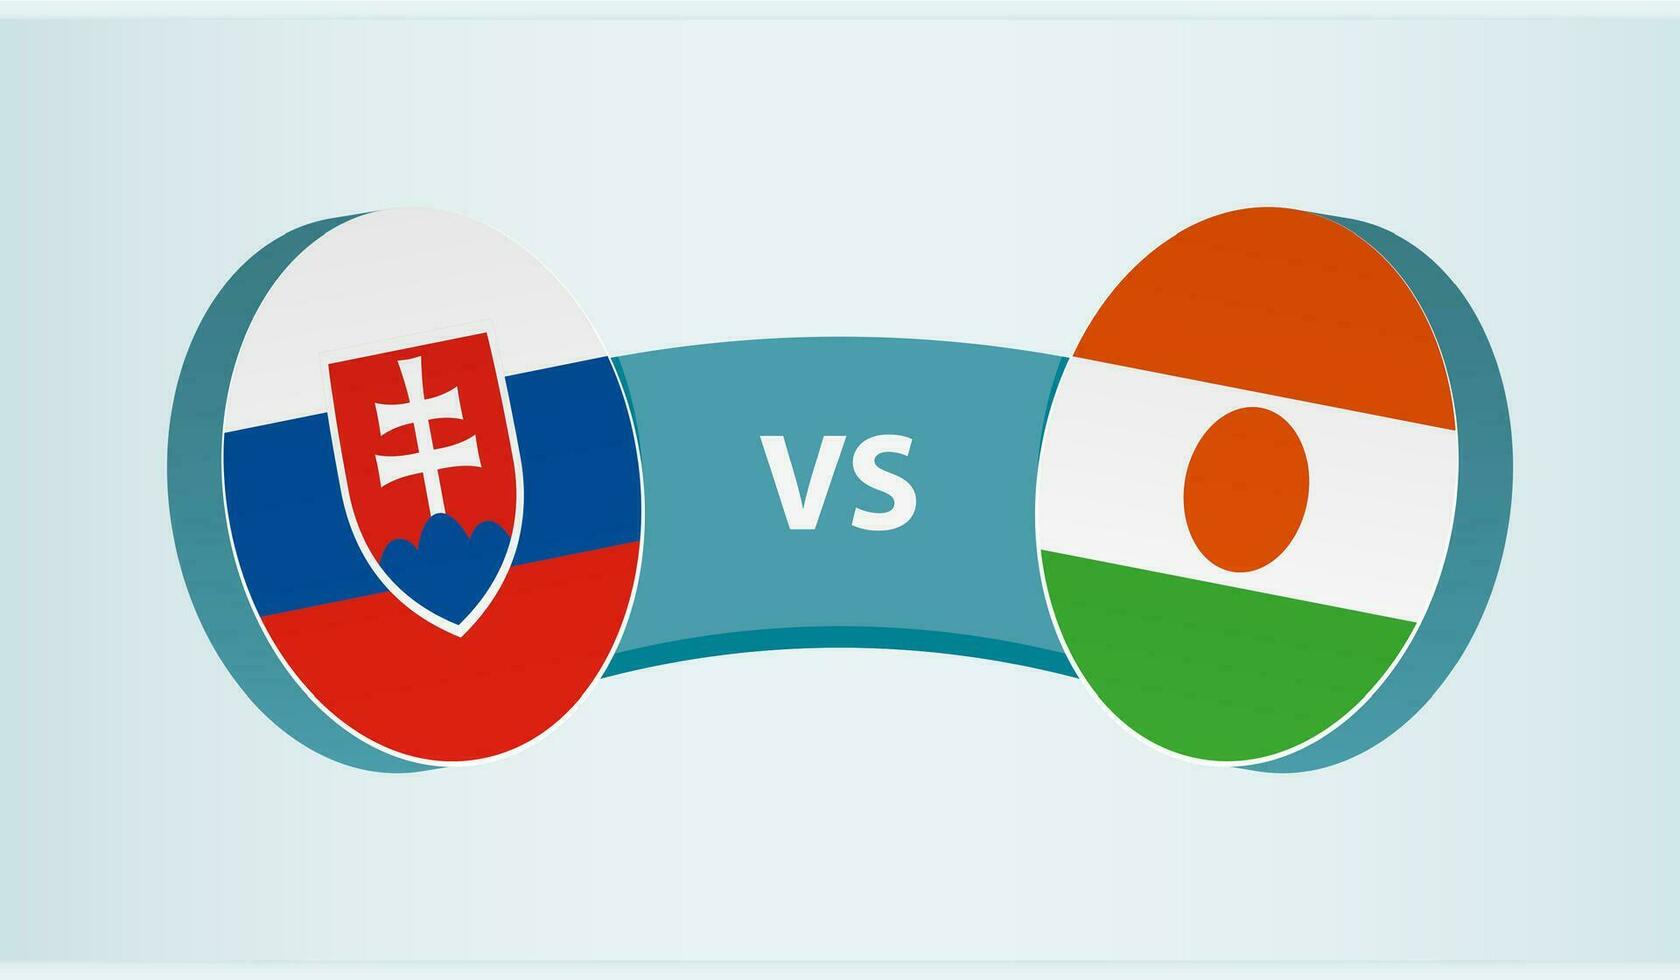 Slovakia versus Niger, team sports competition concept. vector